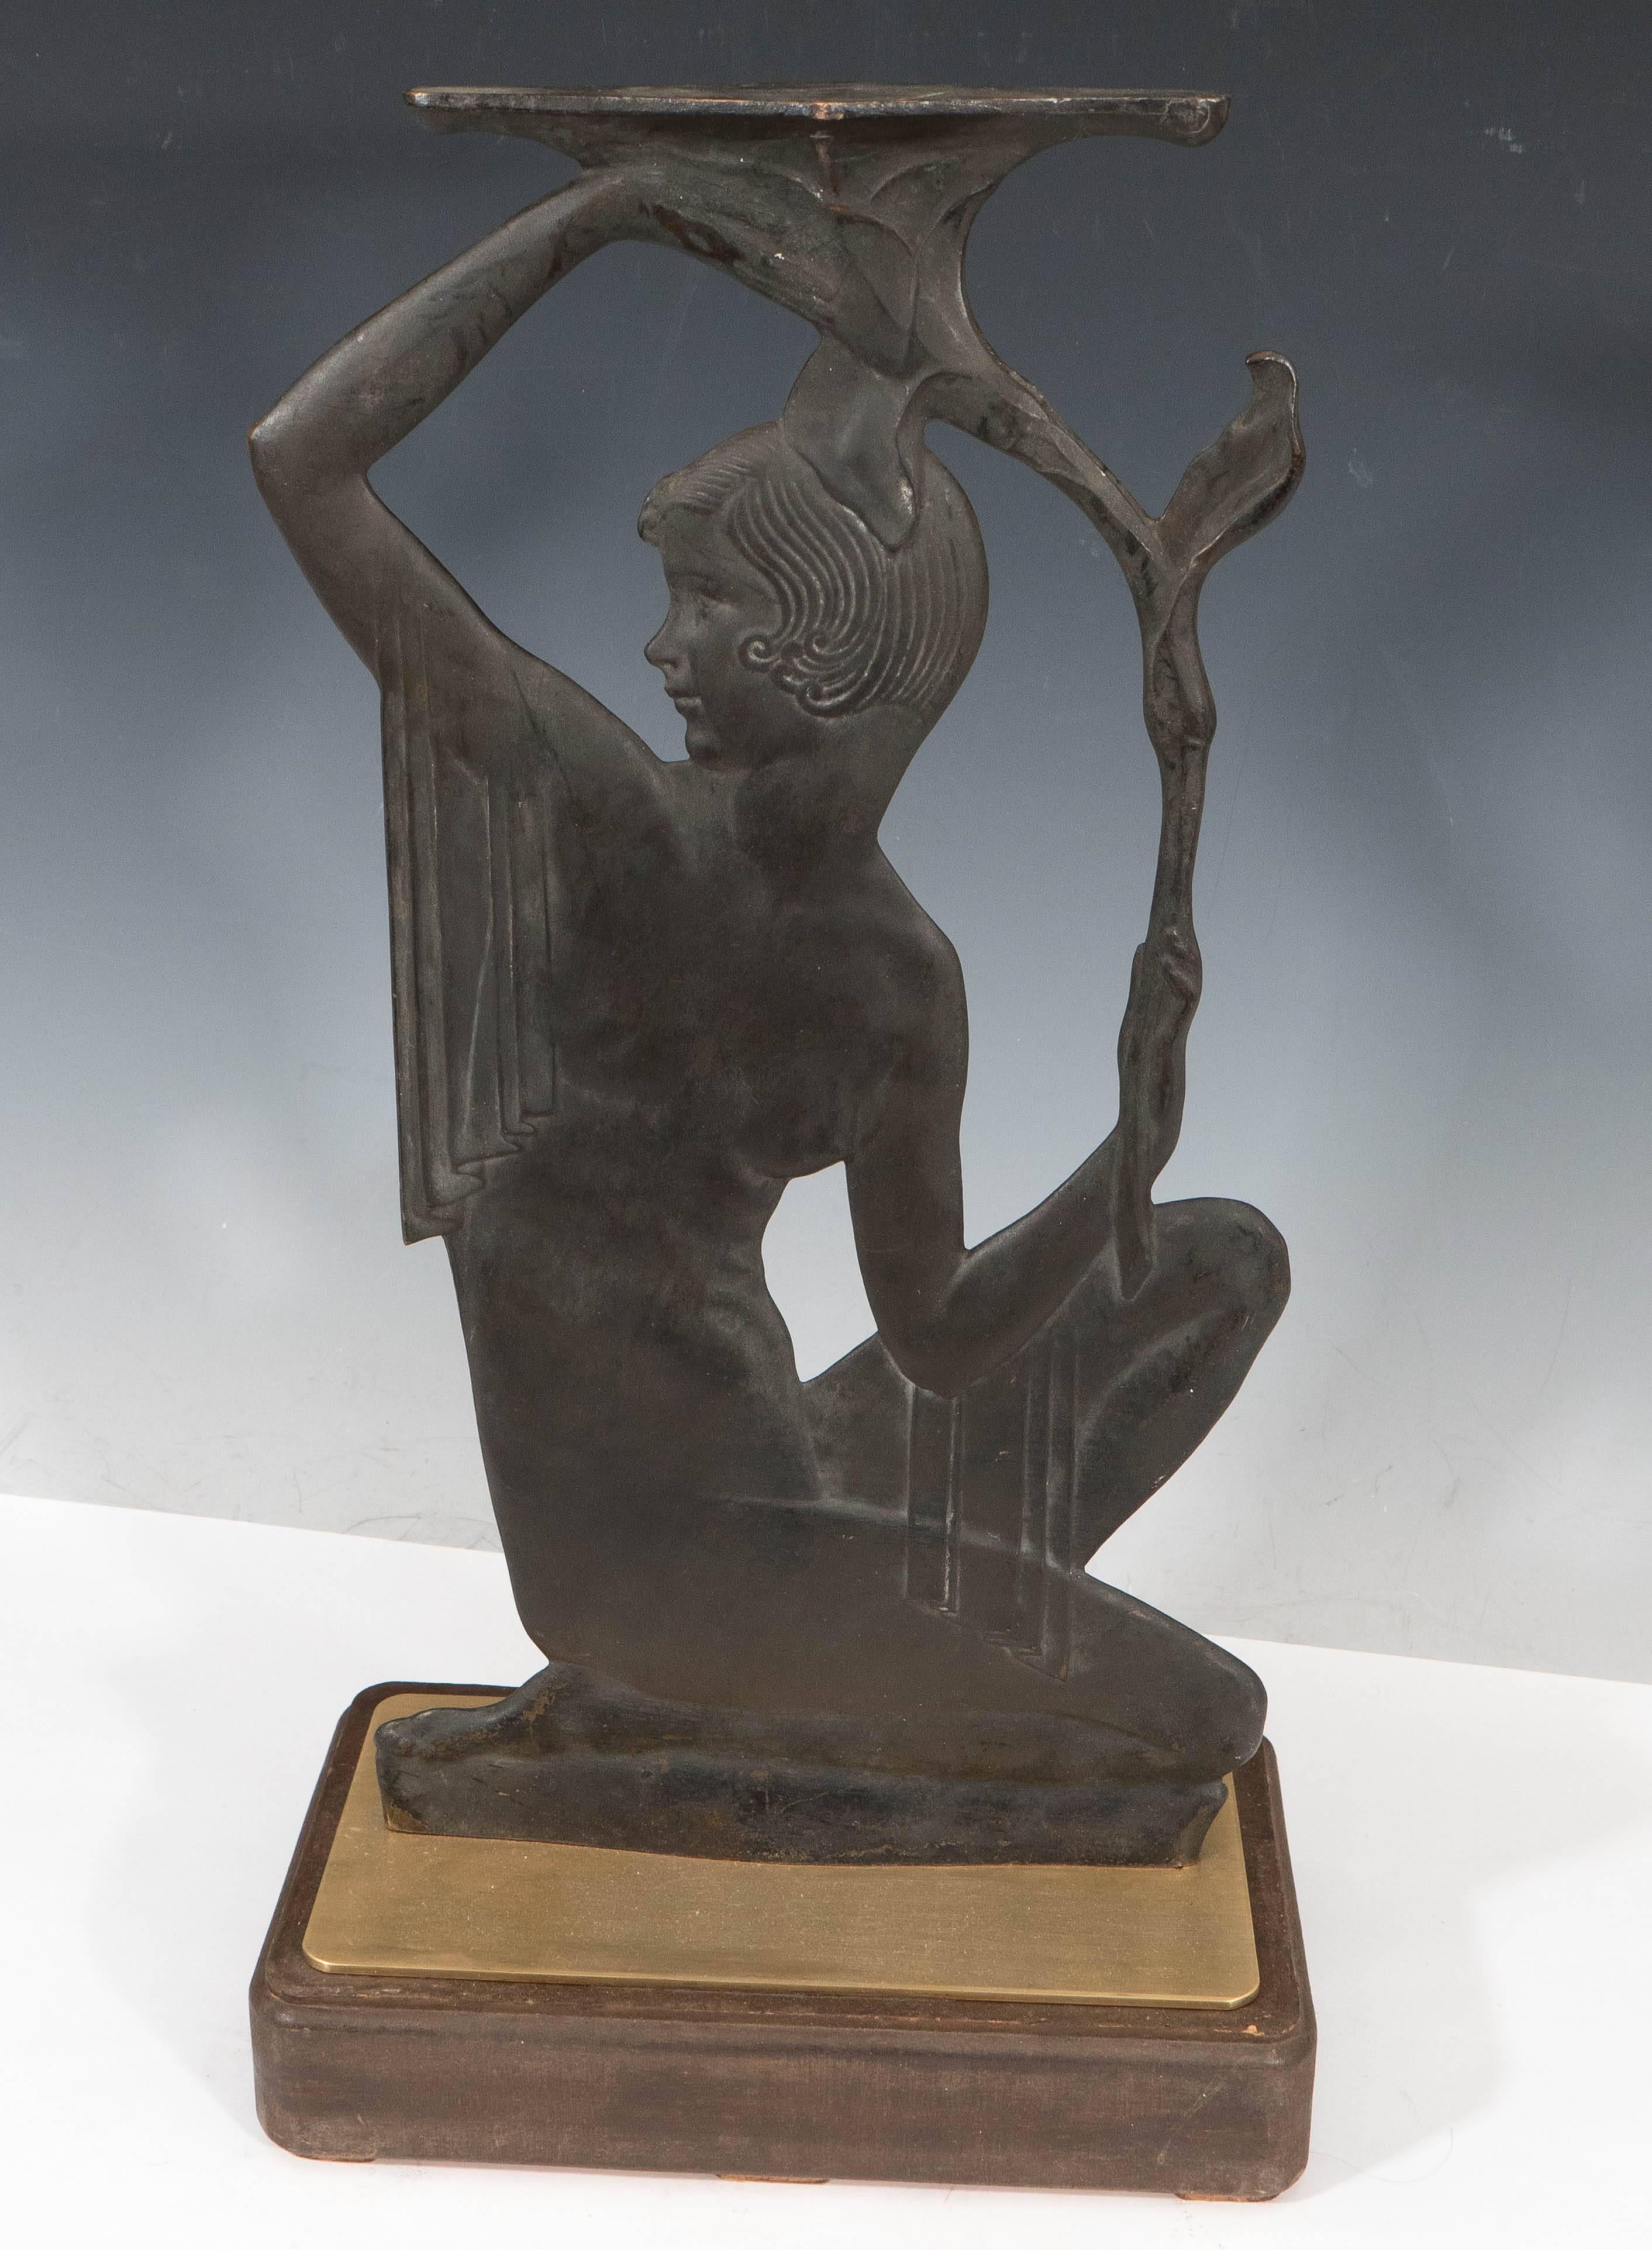 A vintage Art Deco two-dimensional bronze sculpture, by Chicago based sculptor Emory P. Seidel (1881-1954), produced within the early 20th century period. In likeness with his celebrated series of candle holders and candelabras, Seidel derives much